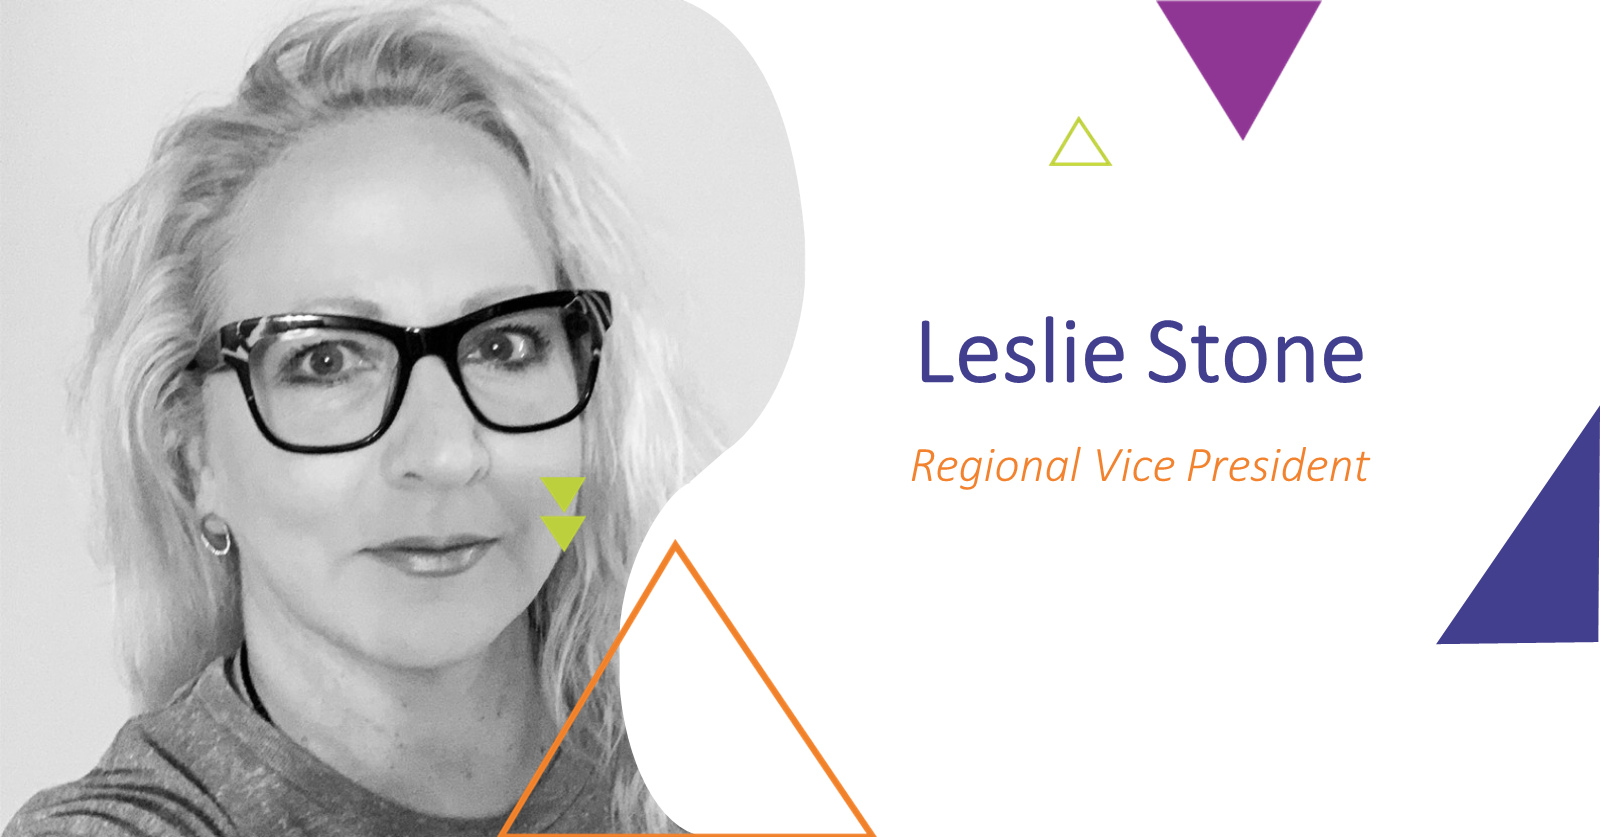 MTM Transit is excited to announce the newest addition to our leadership team: Regional Vice President Leslie Stone.